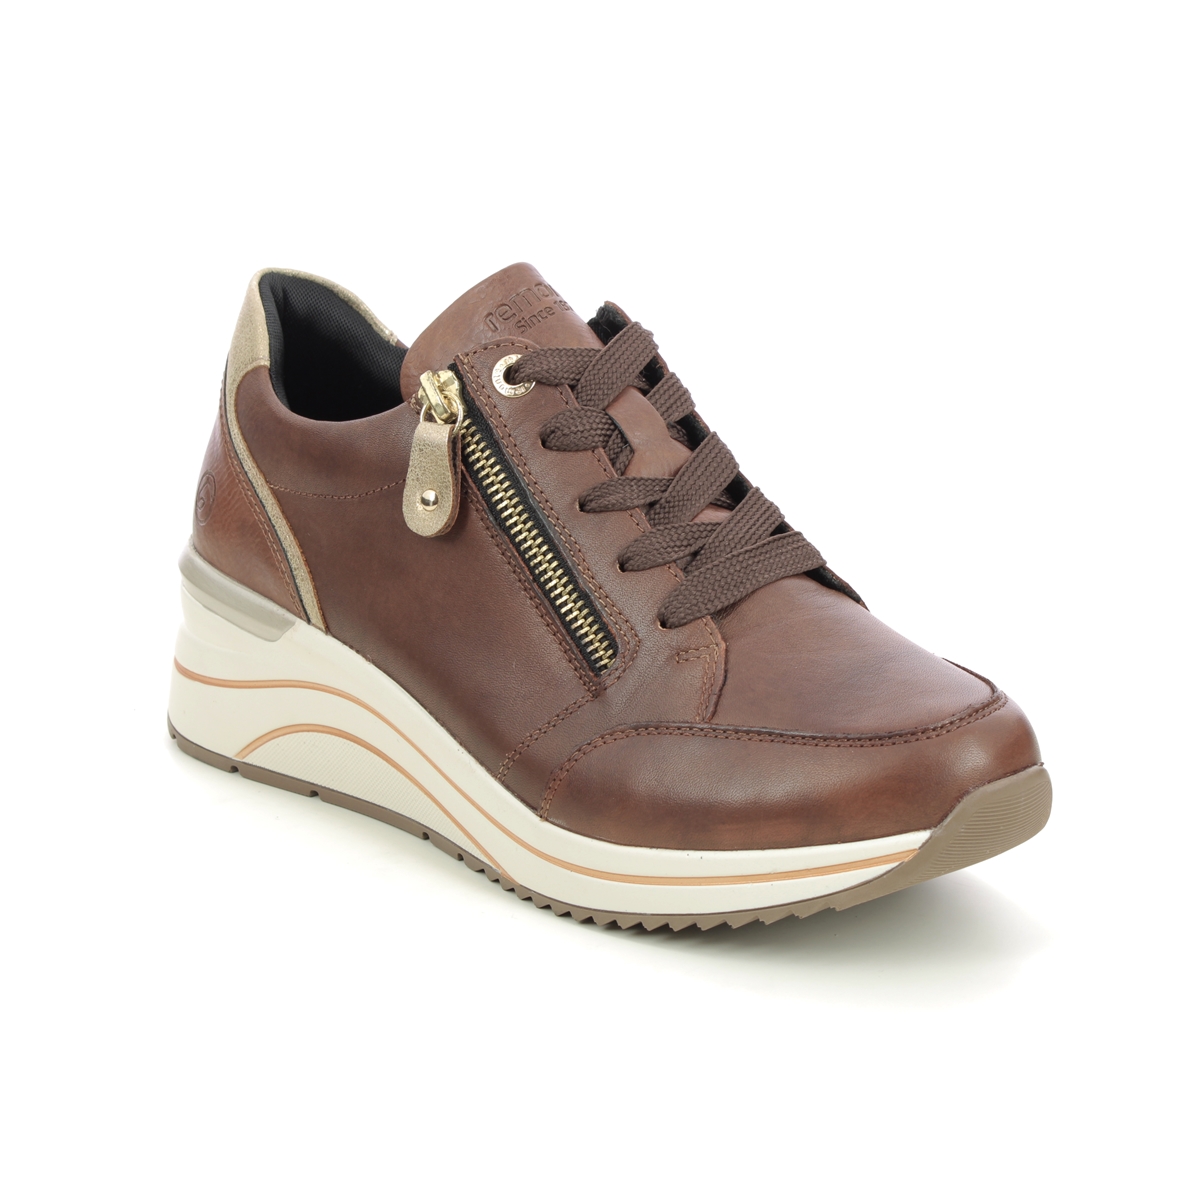 Remonte D0T03-22 Ranzip Wedge Tan Leather Womens trainers in a Plain Leather in Size 37